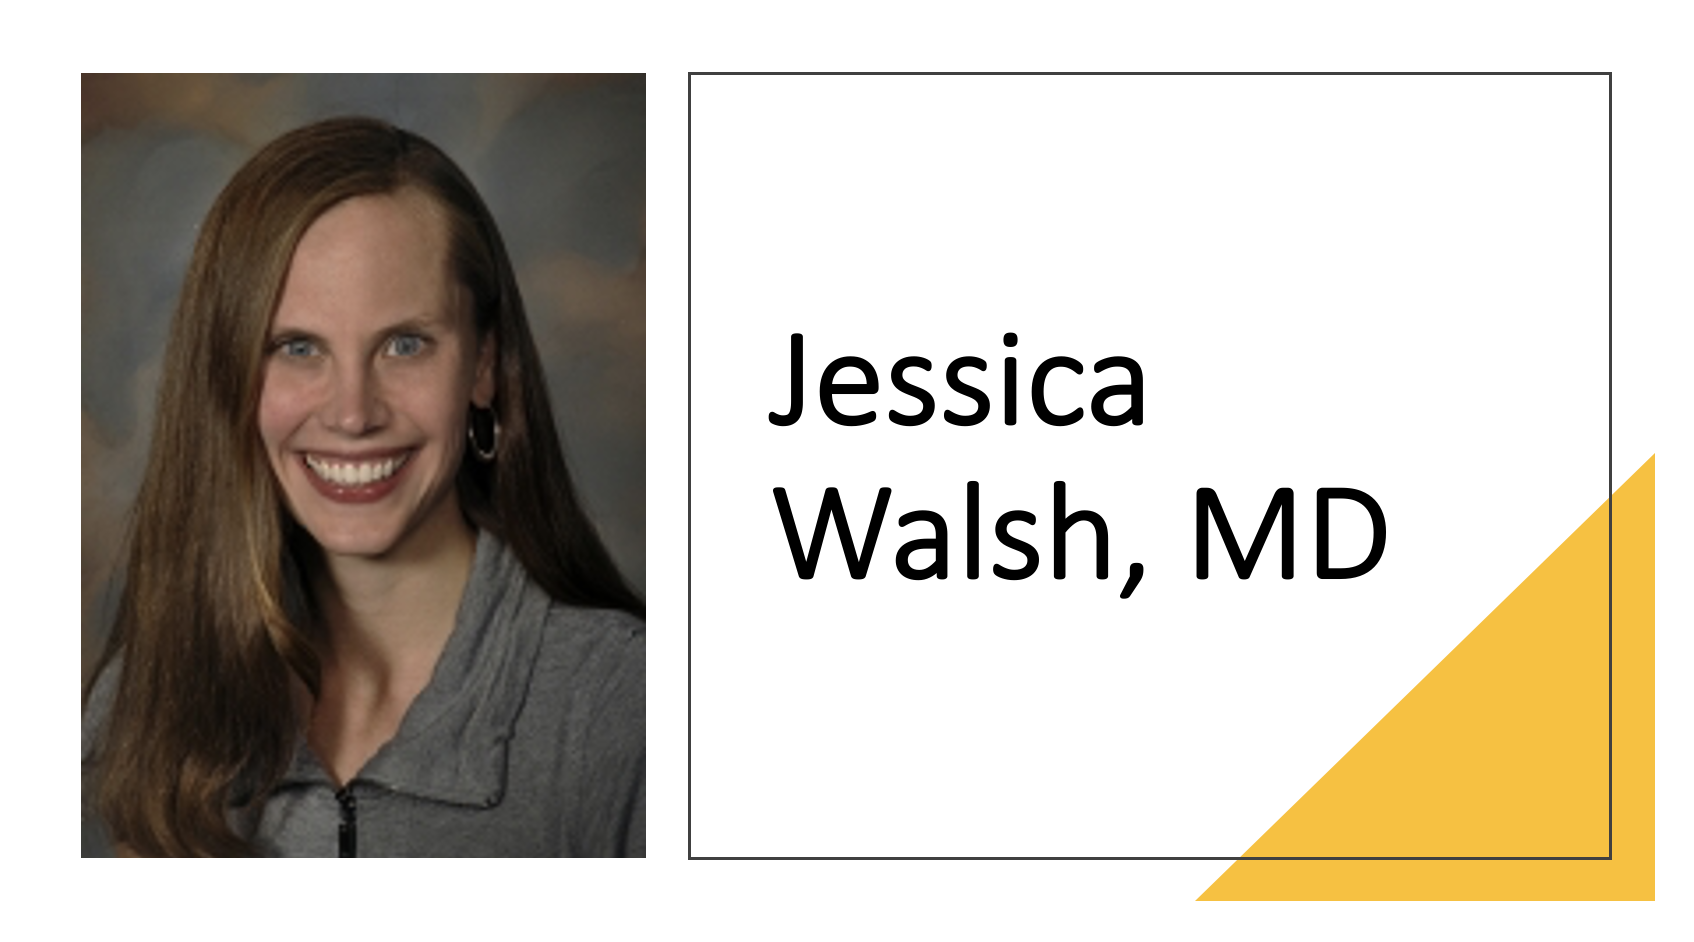 Jessica Walsh, MD: Patient Perspectives of Biologic Treatments for Axial Spondyloarthritis